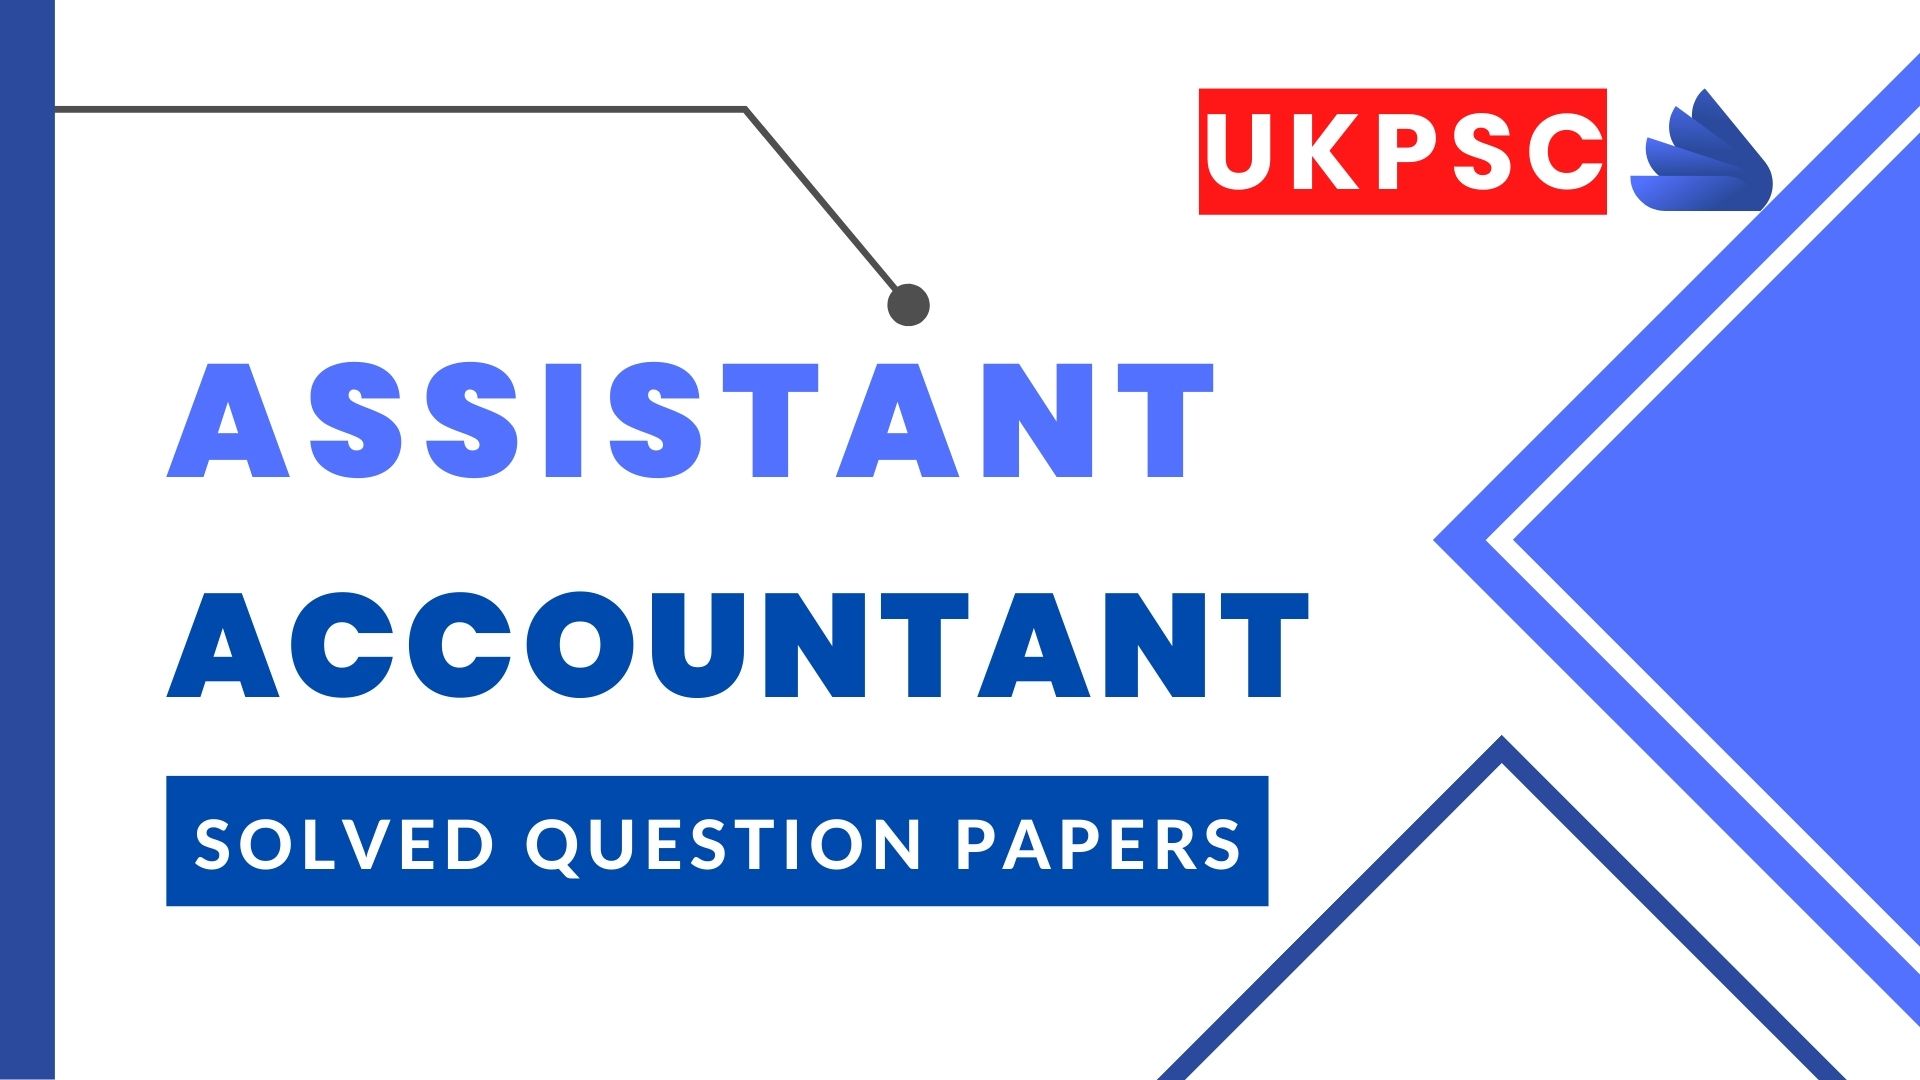 ukpsc asisstant accountant solved question paper 2019